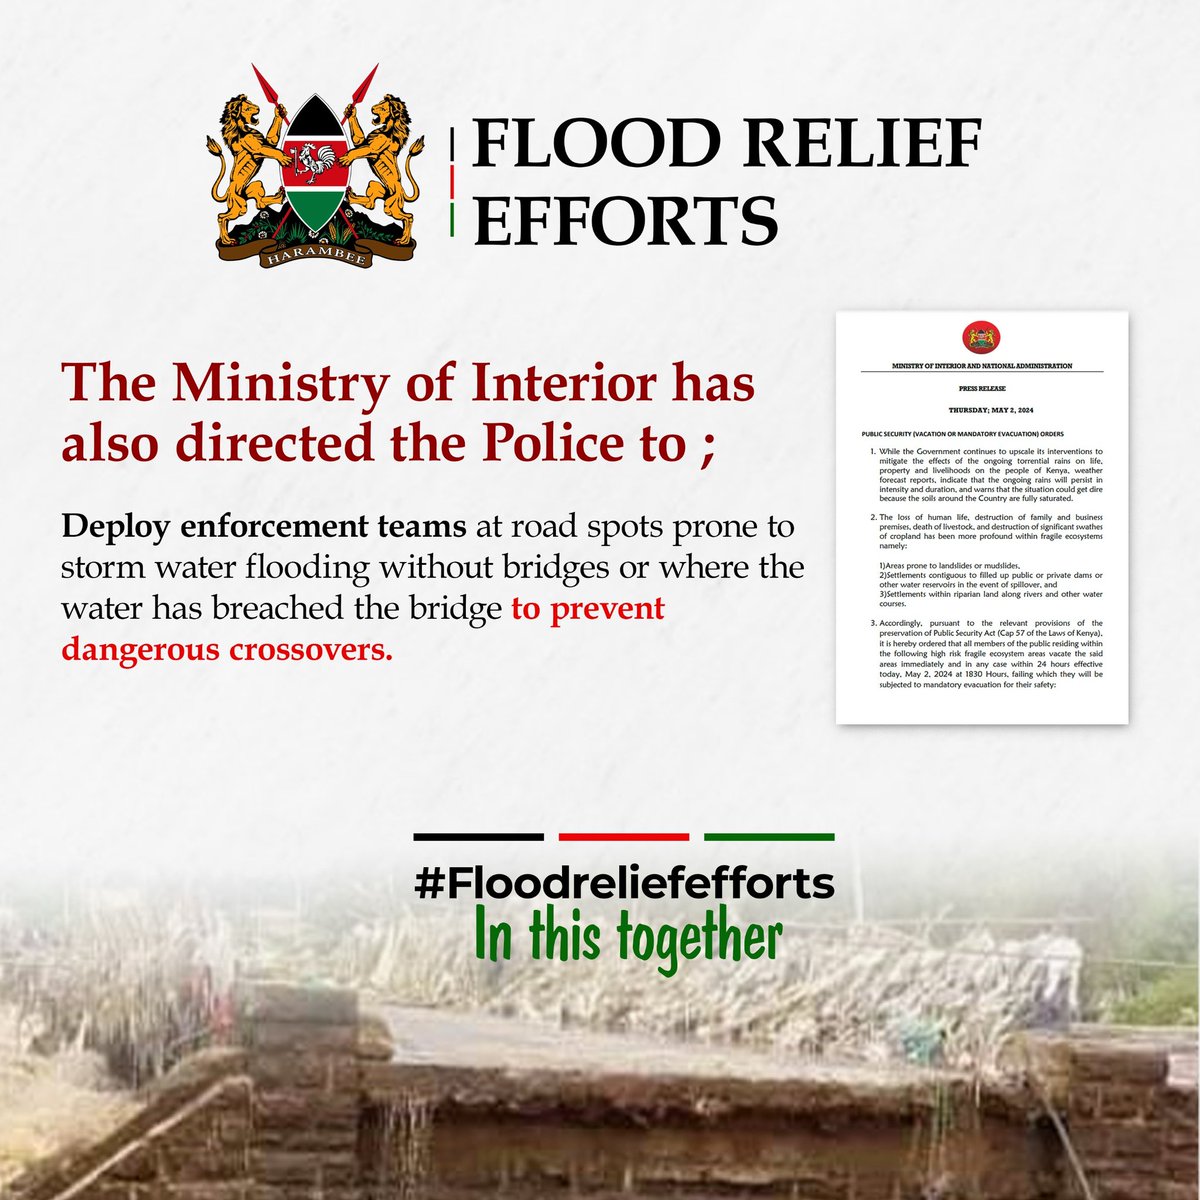 Government-led initiatives, in partnership with stakeholders, prioritize providing essential aid to citizens impacted by floods, mudslides, and landslides, ensuring their basic needs are met.#FloodReliefEfforts
In It Together